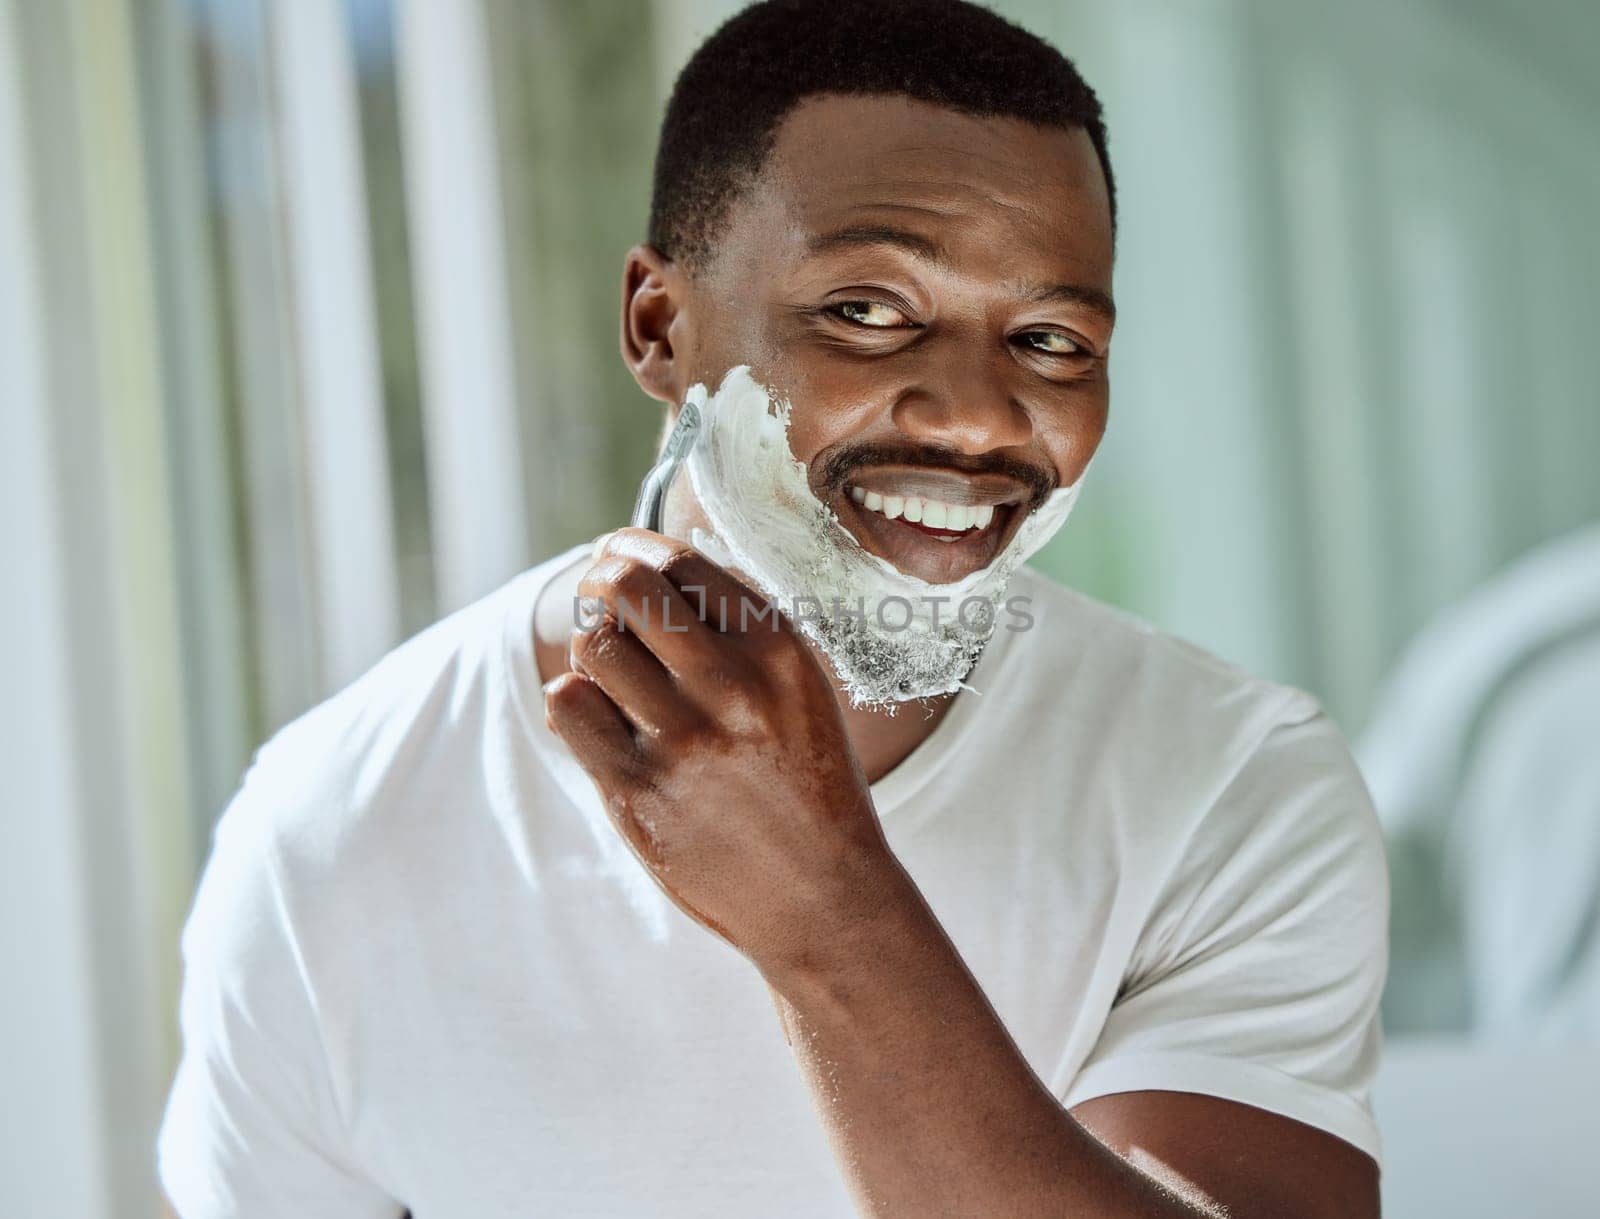 Cream, razor and shaving black man in the bathroom for skincare, beard grooming routine and facial care. Smile, treatment and African person start to shave face for hair removal with foam in morning by YuriArcurs